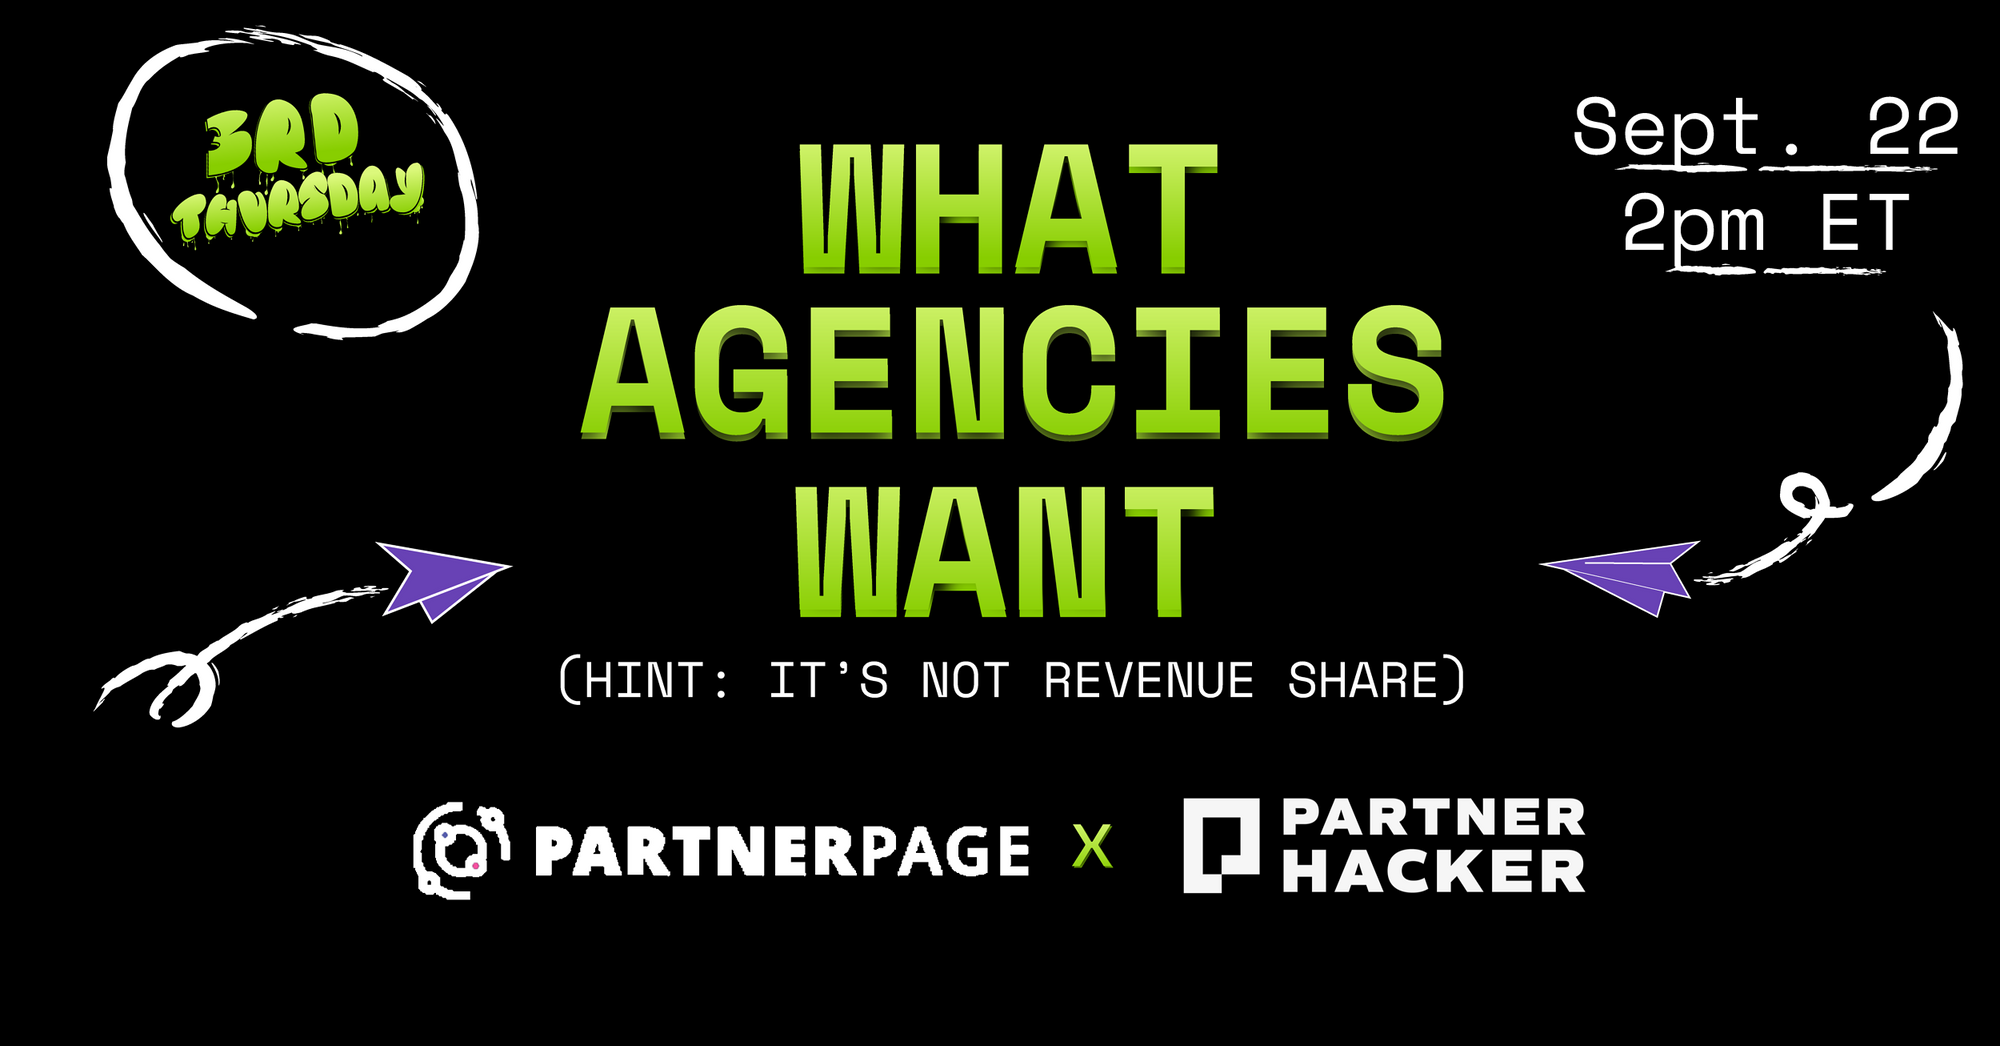 splach image what agencies want event with partnerhacker and partnerpage on September 22 at 2pm